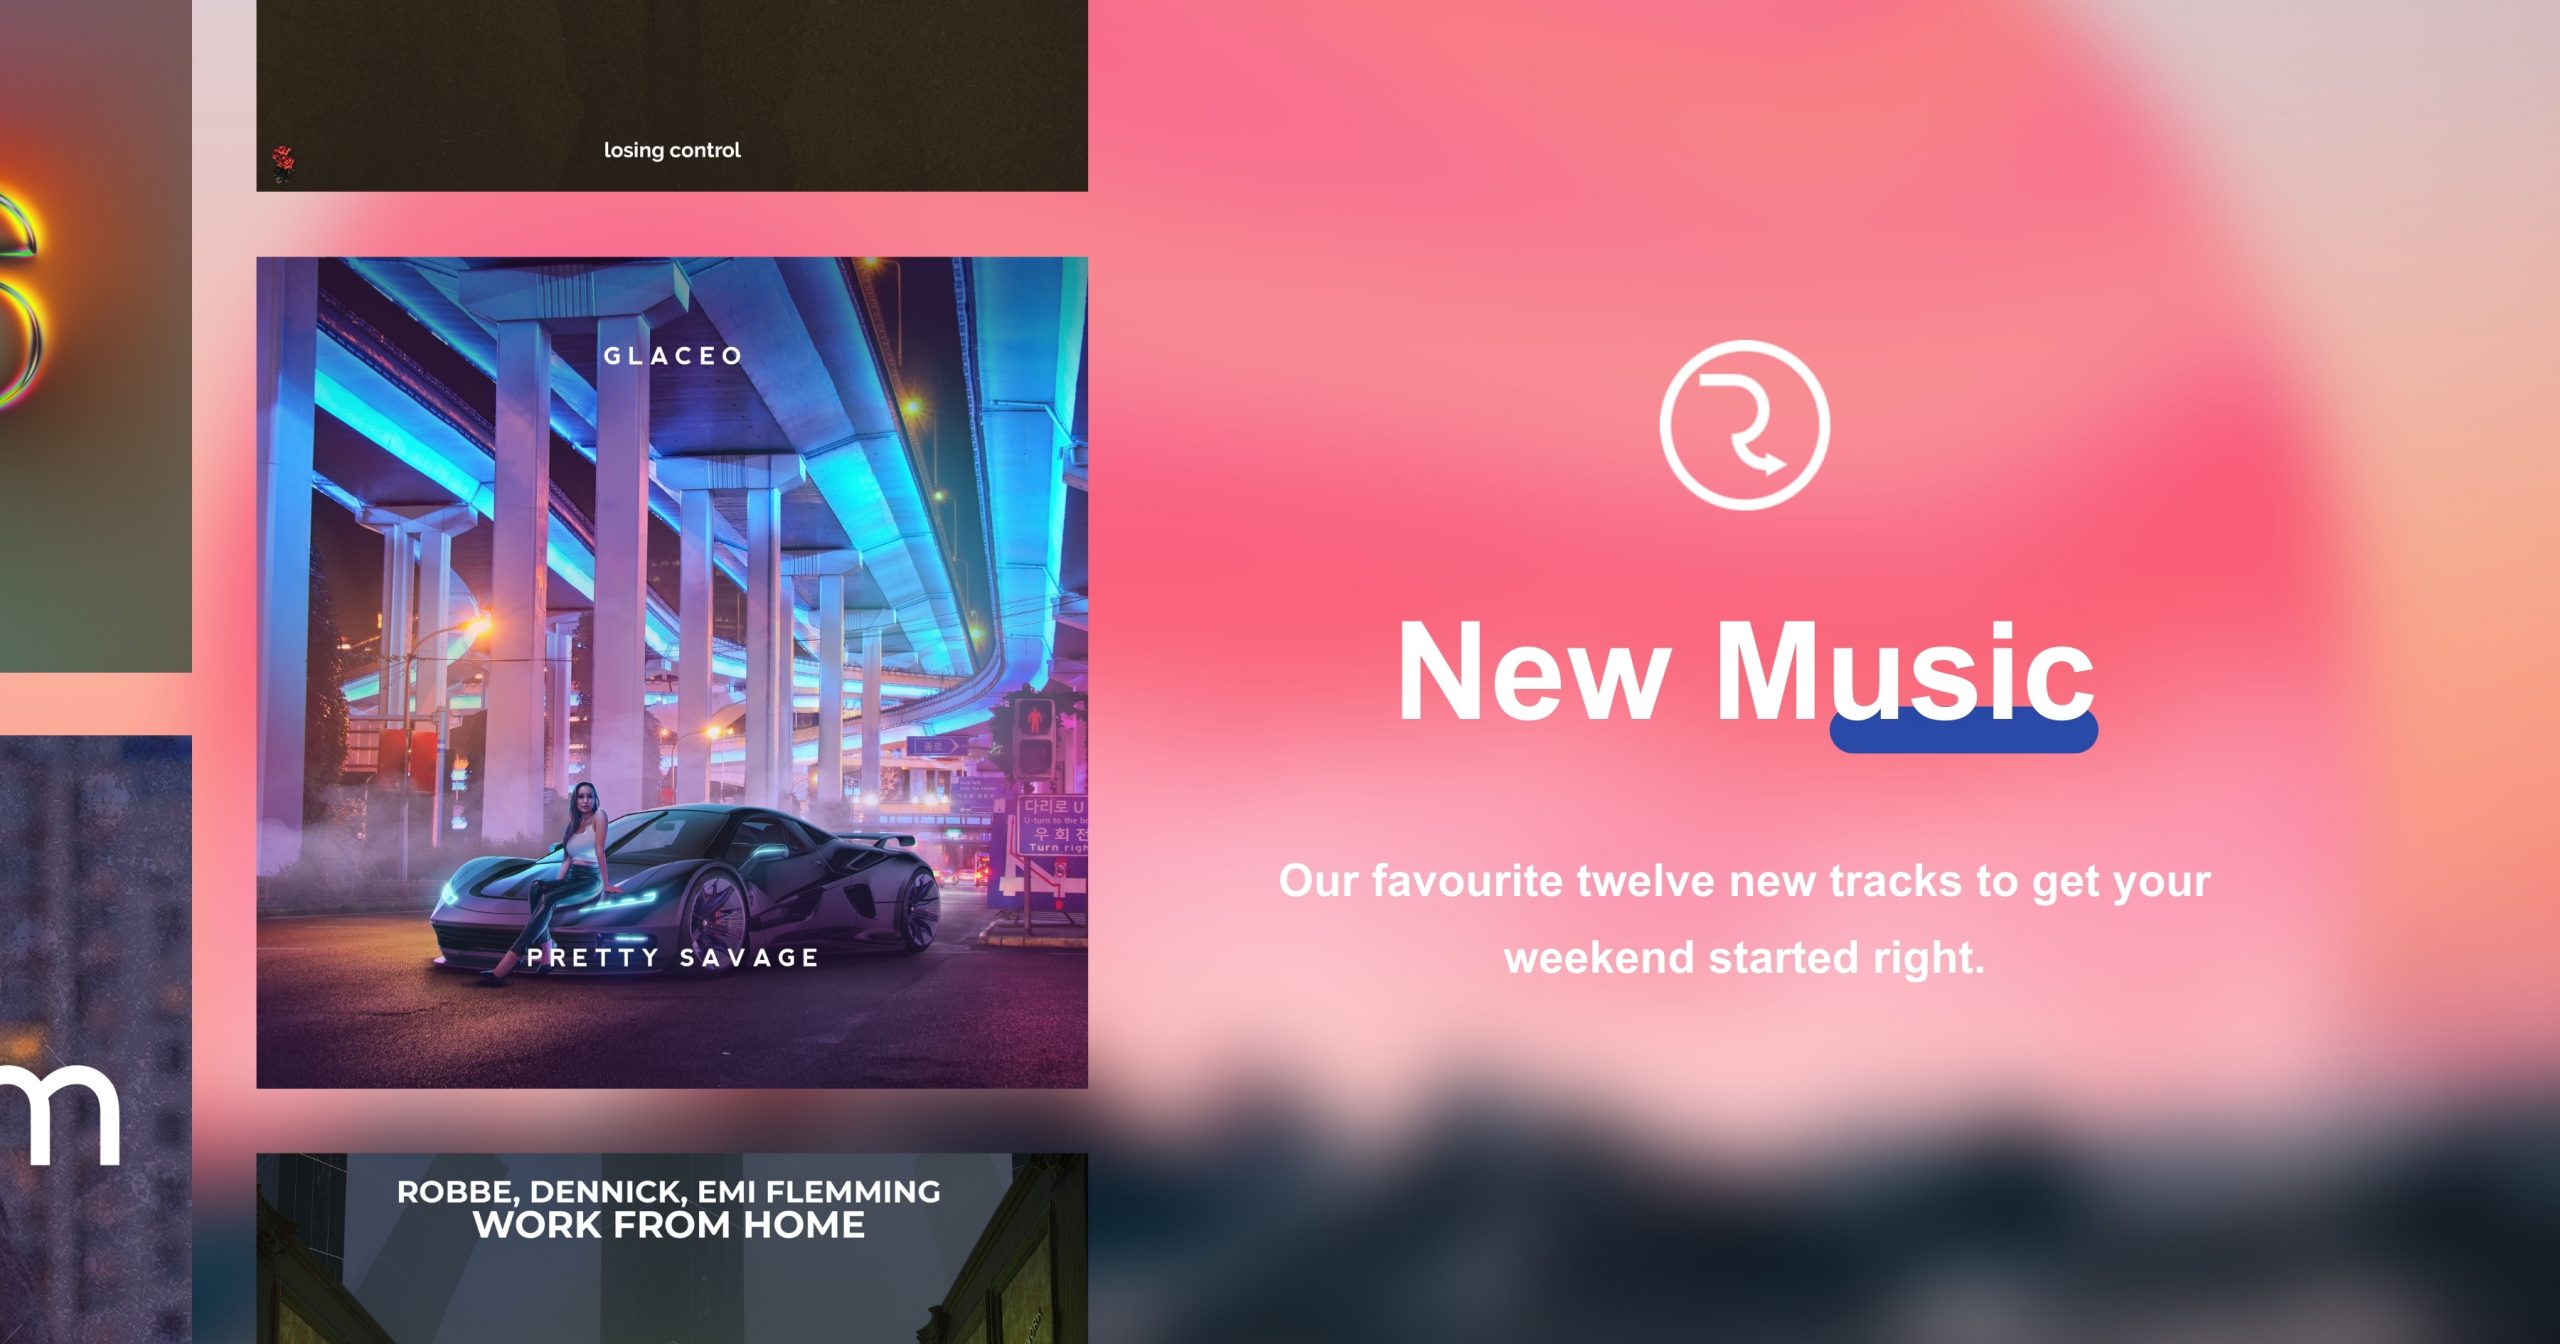 RouteNote’s New Music Releases 10th September 2021: the best twelve new tracks from RouteNote’s very own